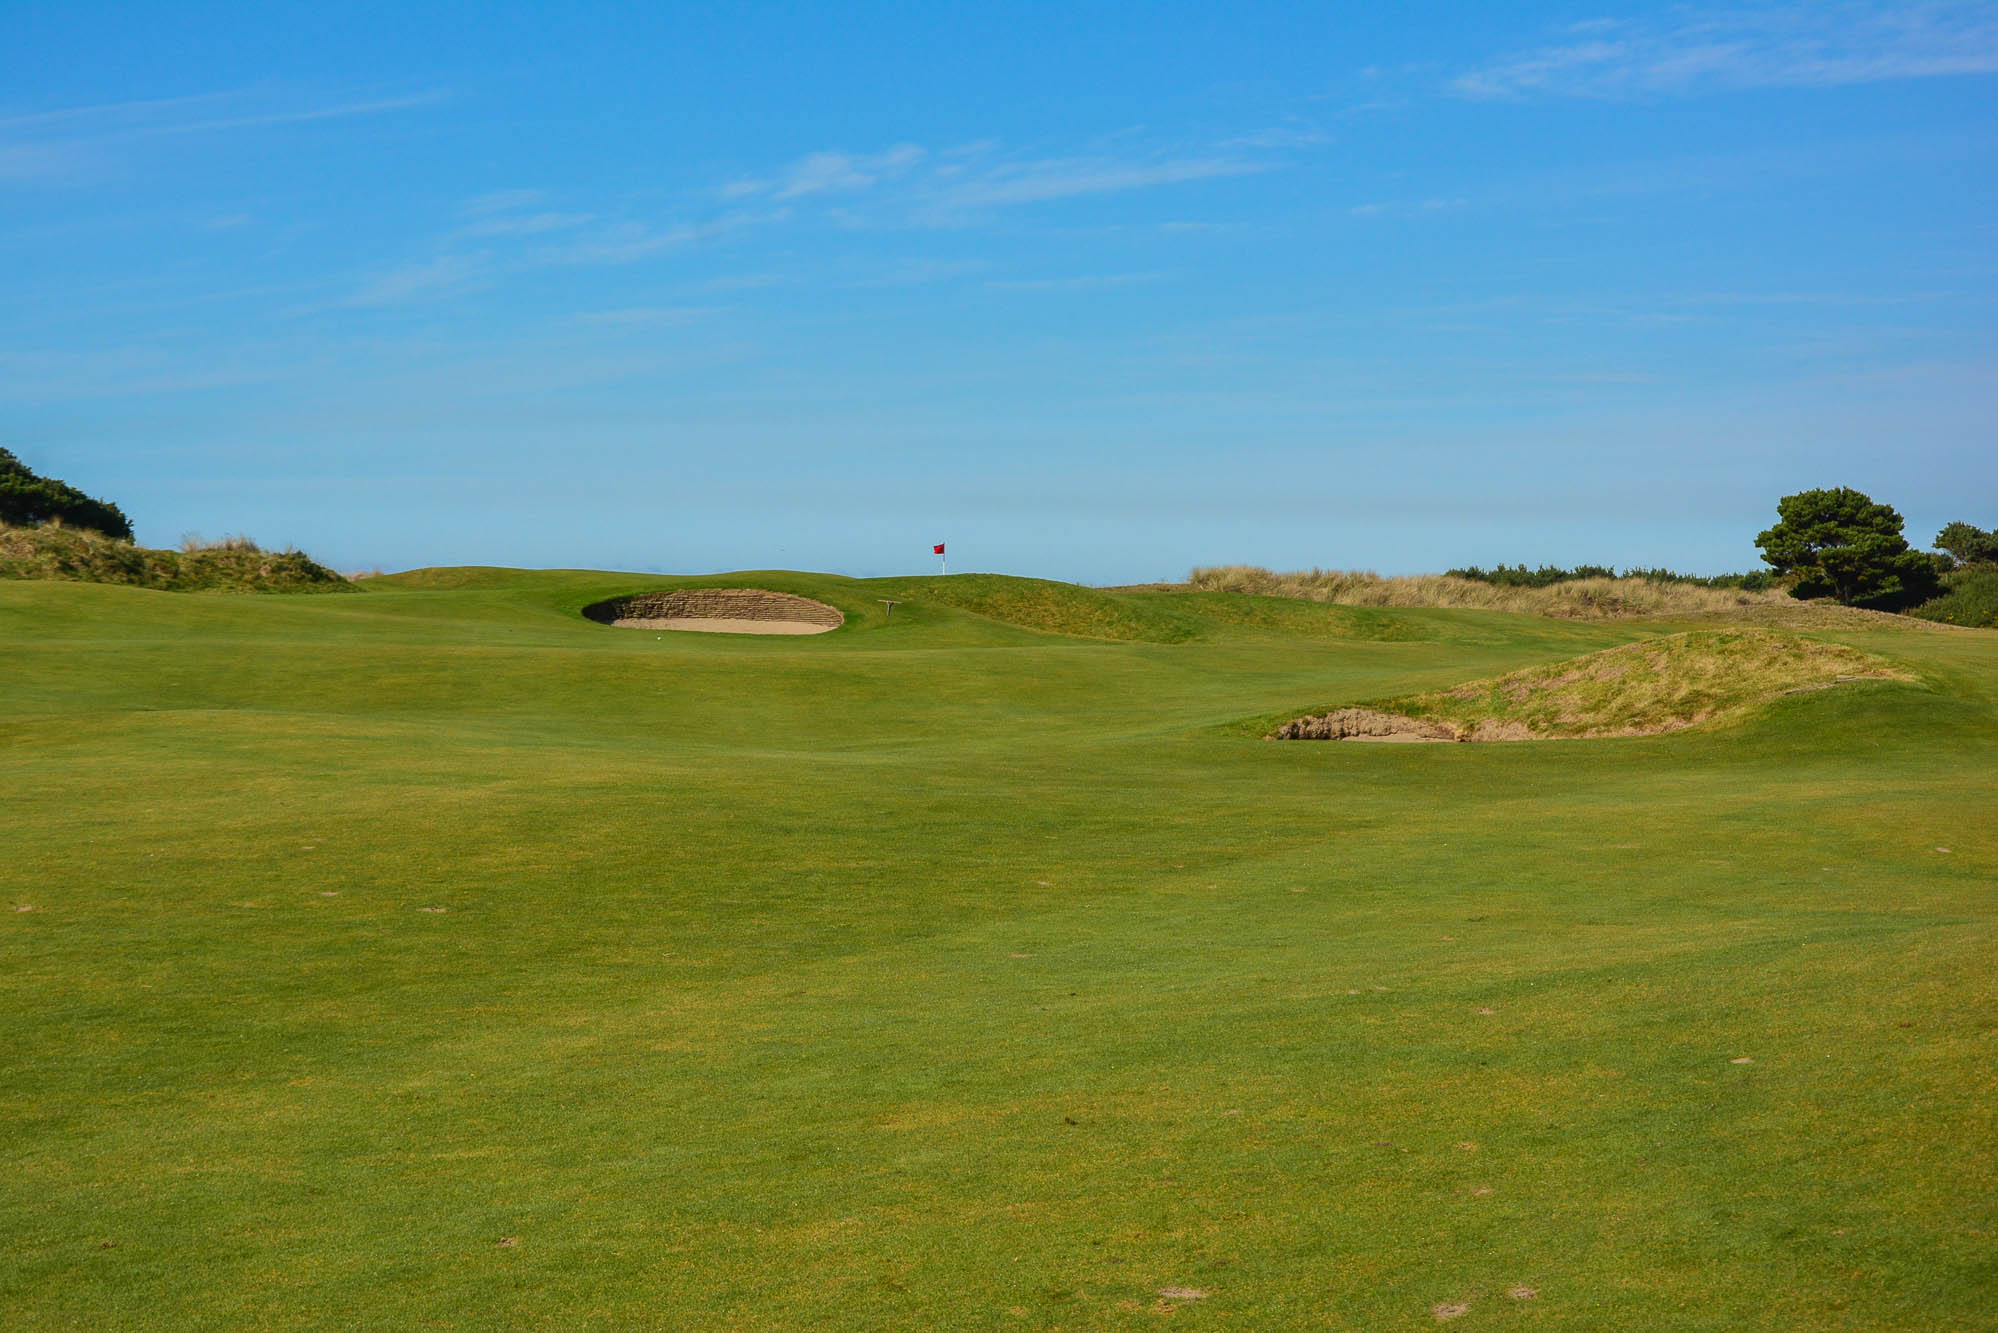 Bandon Dunes: The Original Course Still Holds Up 20 Years Later